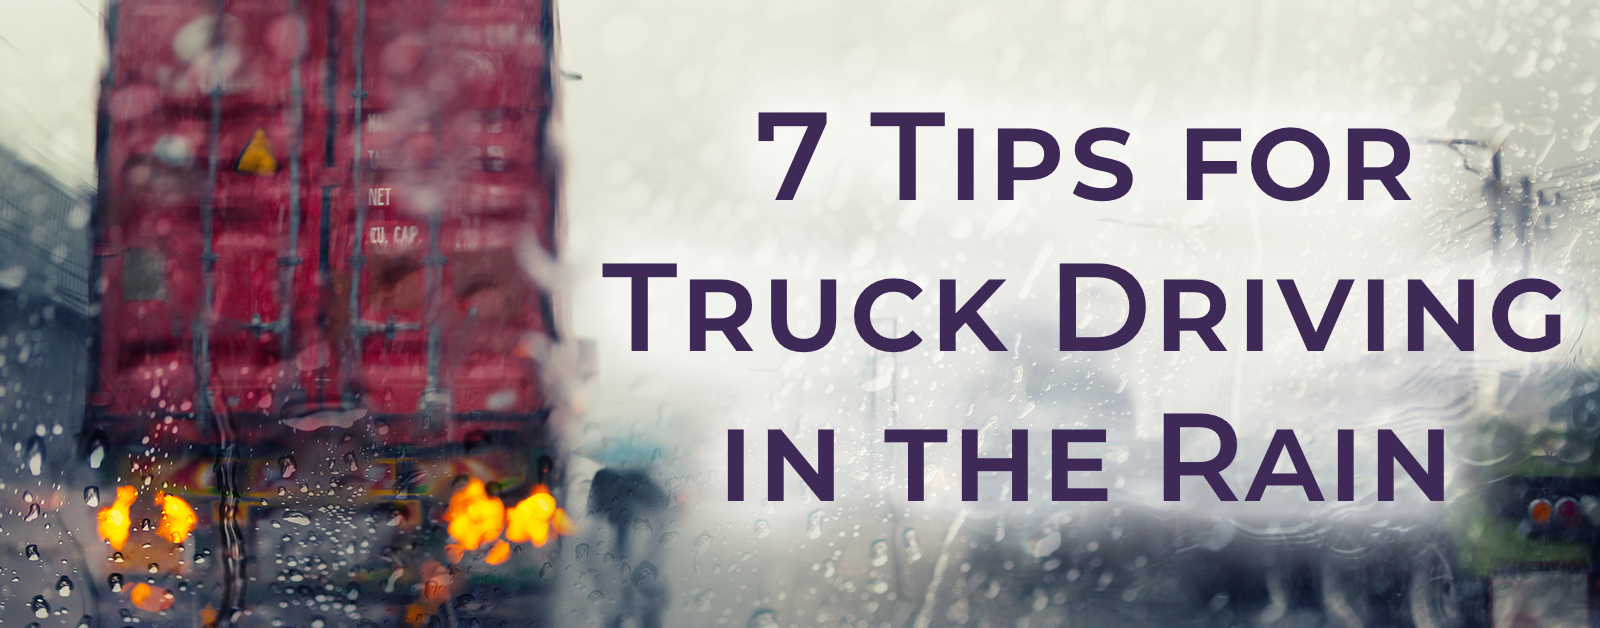 7 Tips For Truck Driving in the Rain